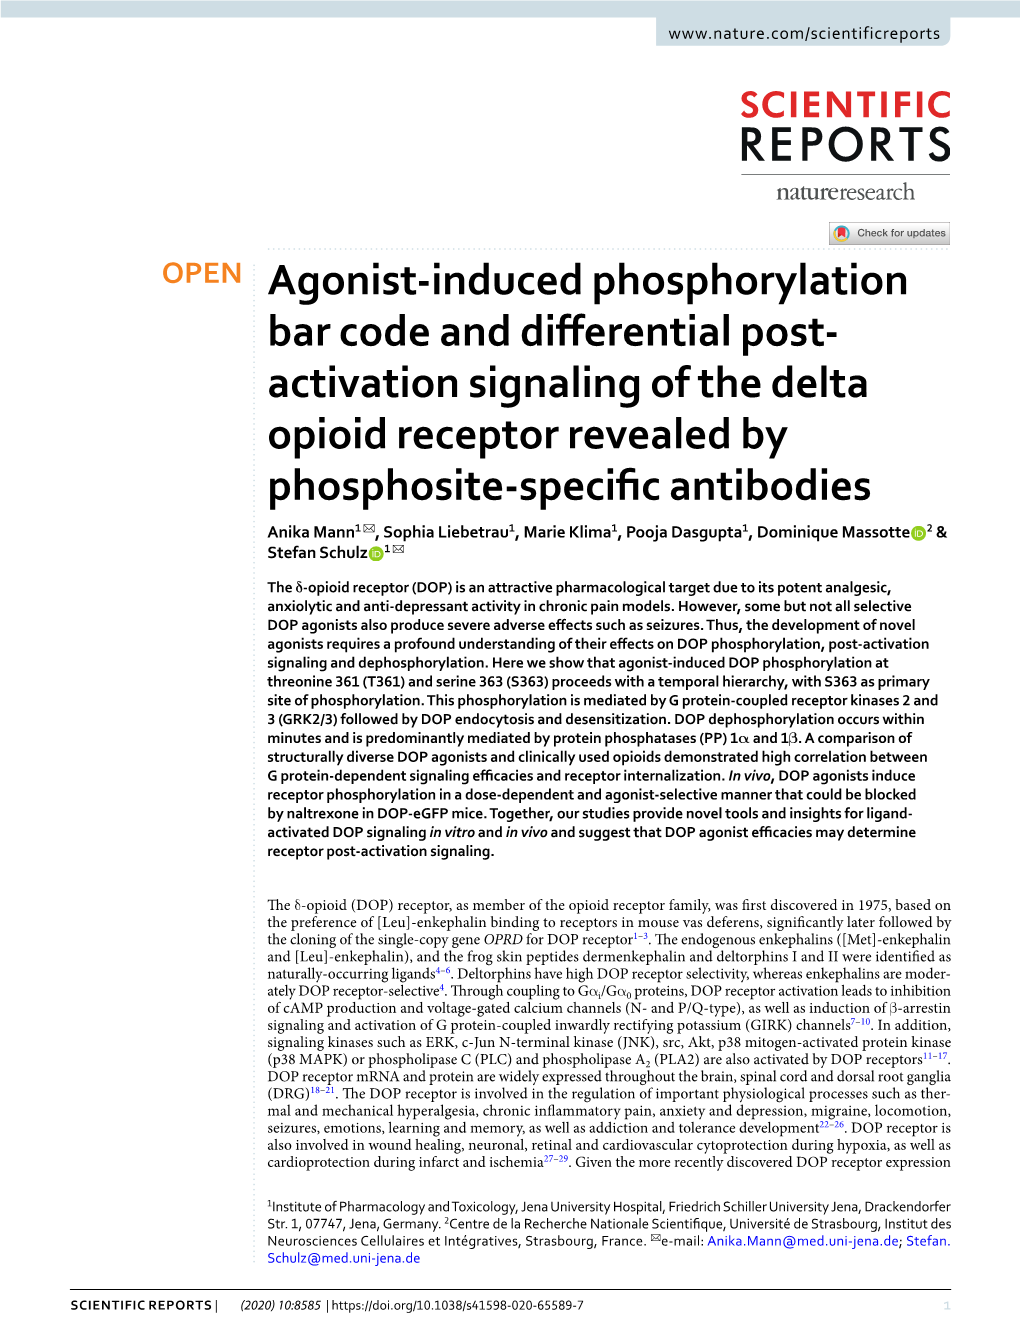 Agonist-Induced Phosphorylation Bar Code and Differential